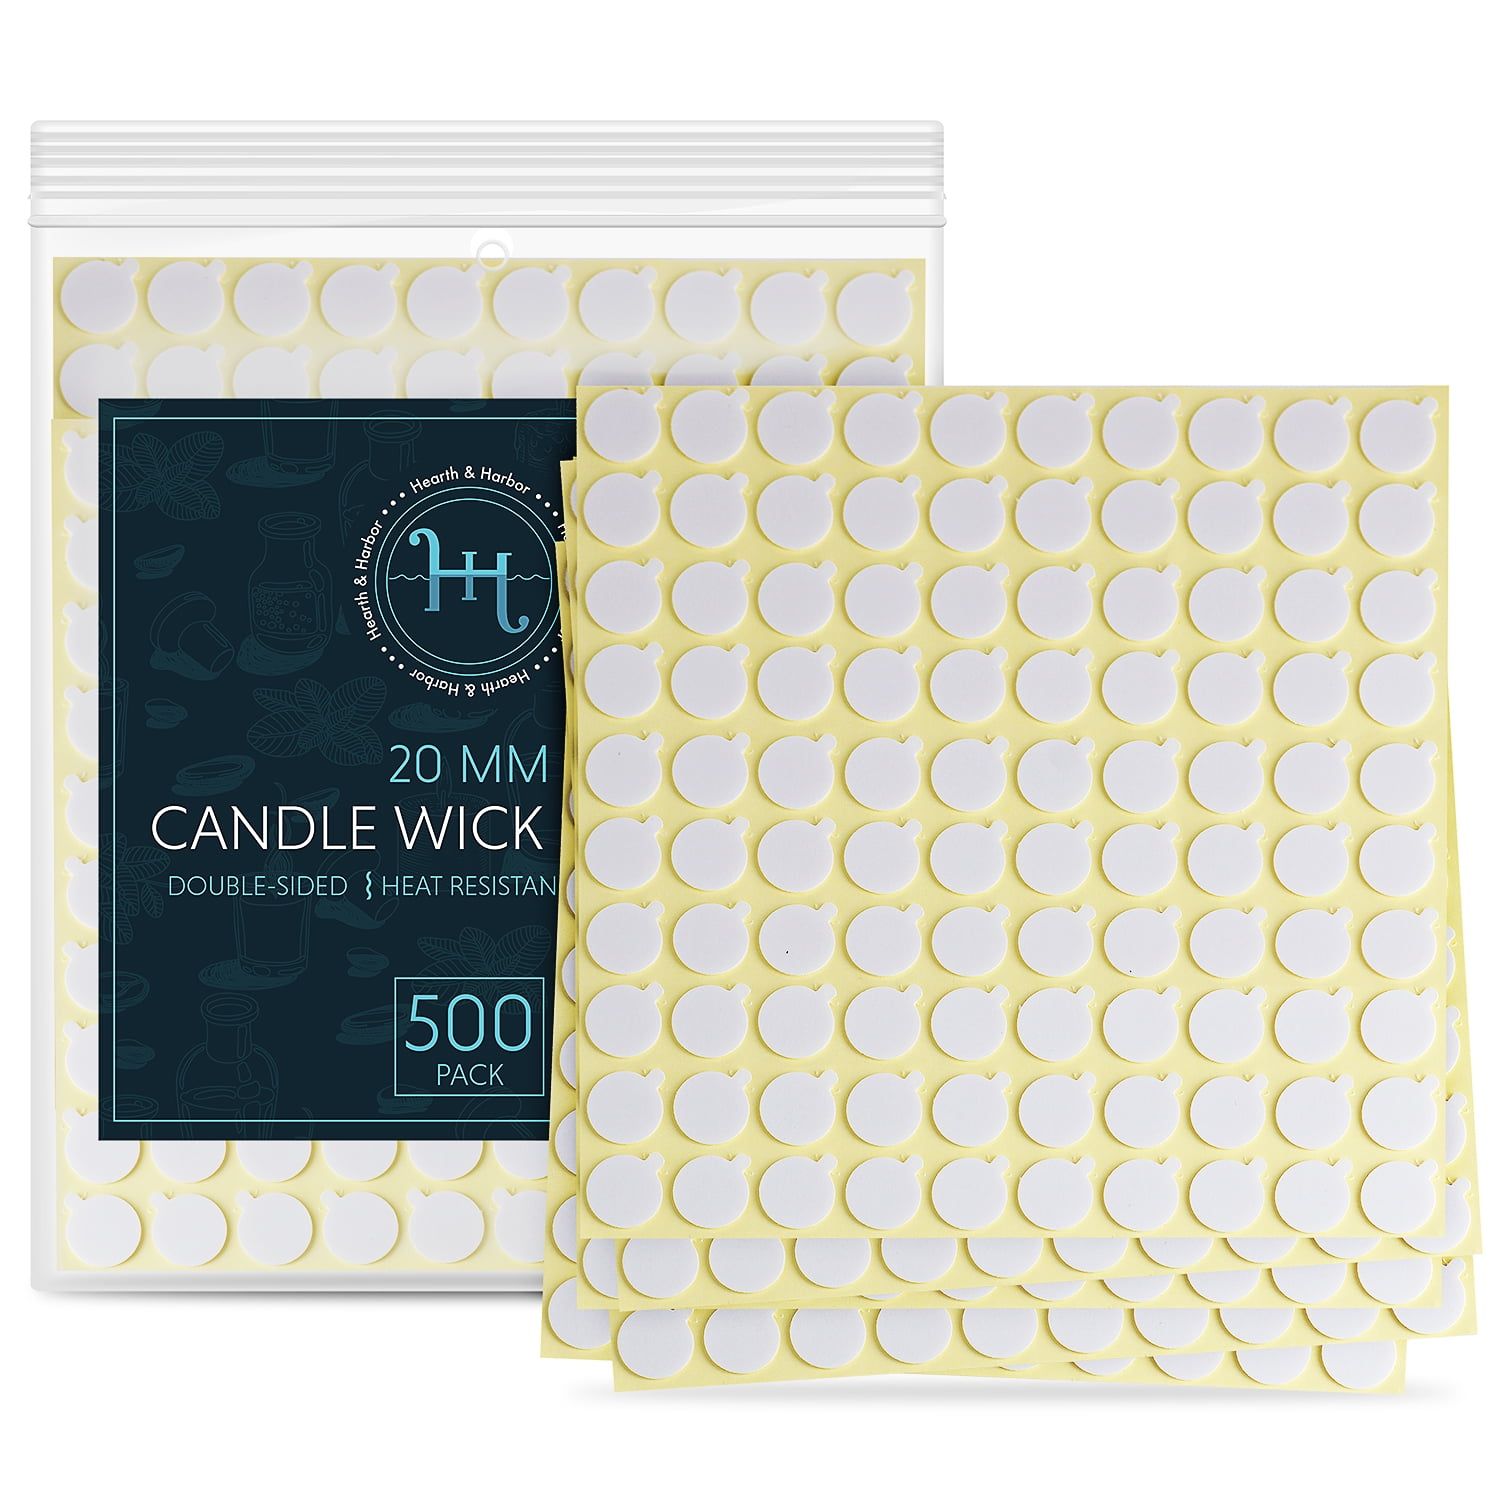 200 Candle Wick Stickers, Made Of Heat-resistant Glue And Stably Attached  To The Candle In Hot Wax